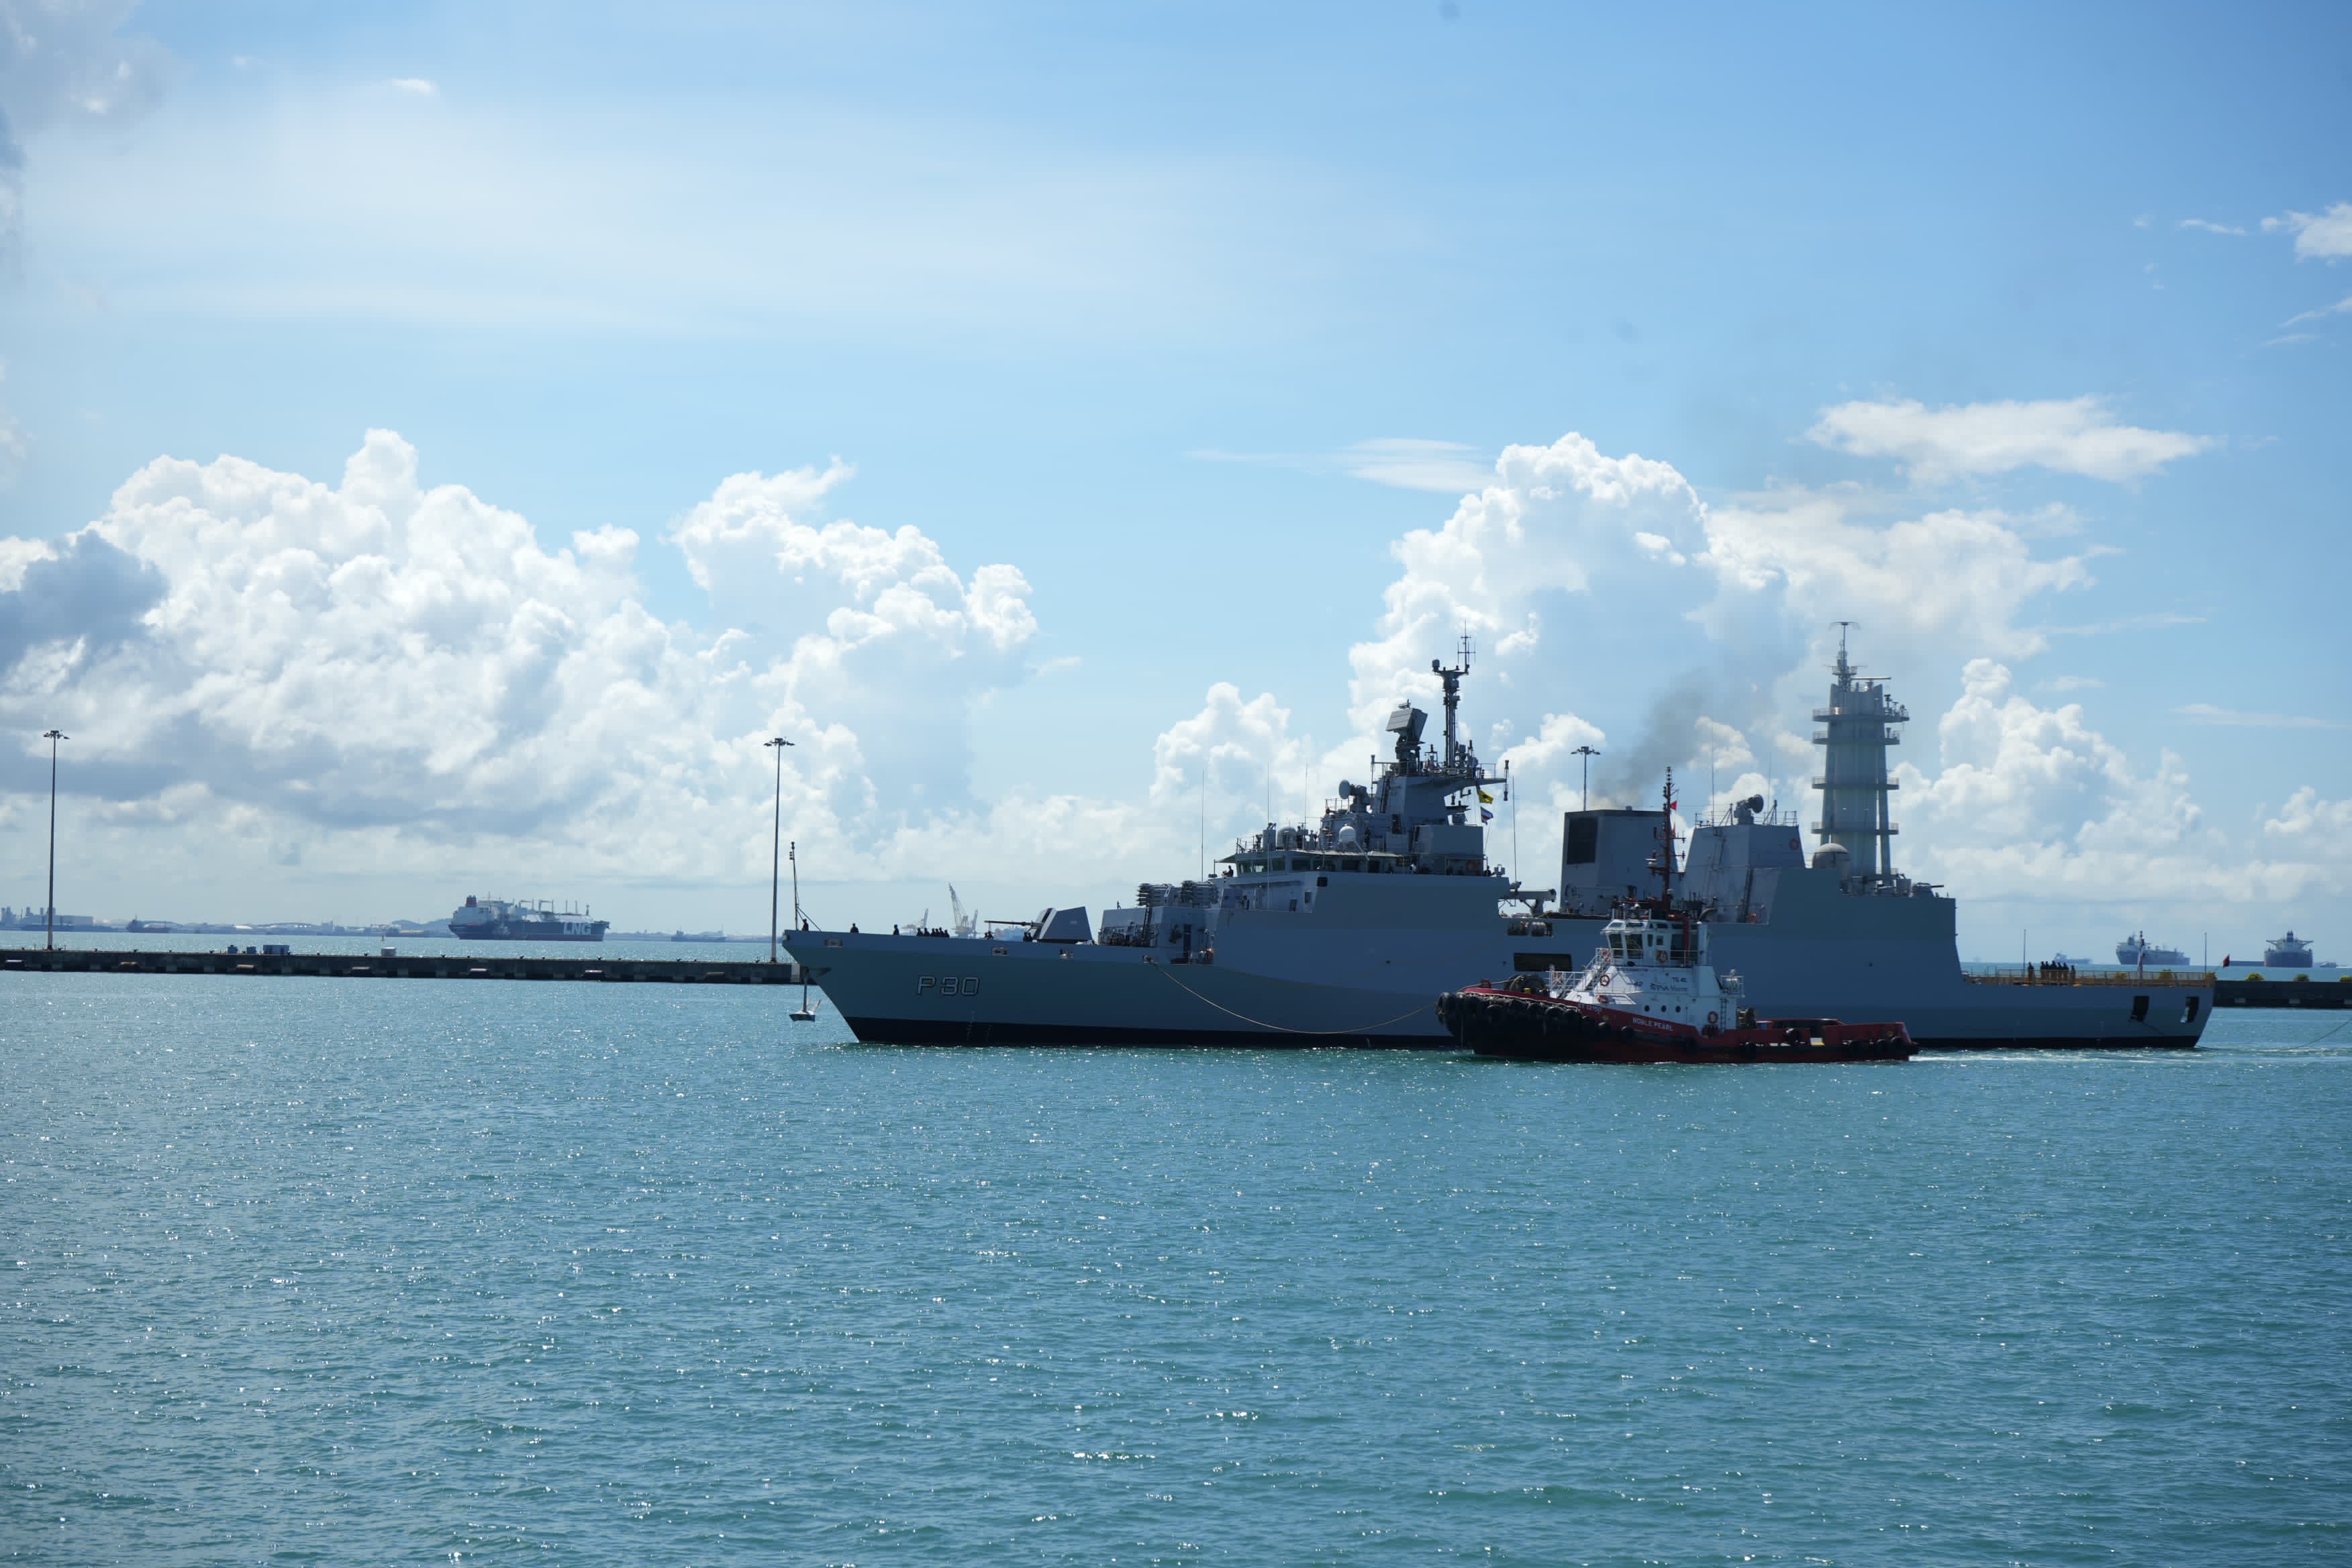 INDIAN NAVAL SHIPS DELHI, SHAKTI, AND KILTAN ARRIVED AT SINGAPORE, AS A PART OF EASTERN FLEET DEPLOYMENT TO SOUTH CHINA SEA